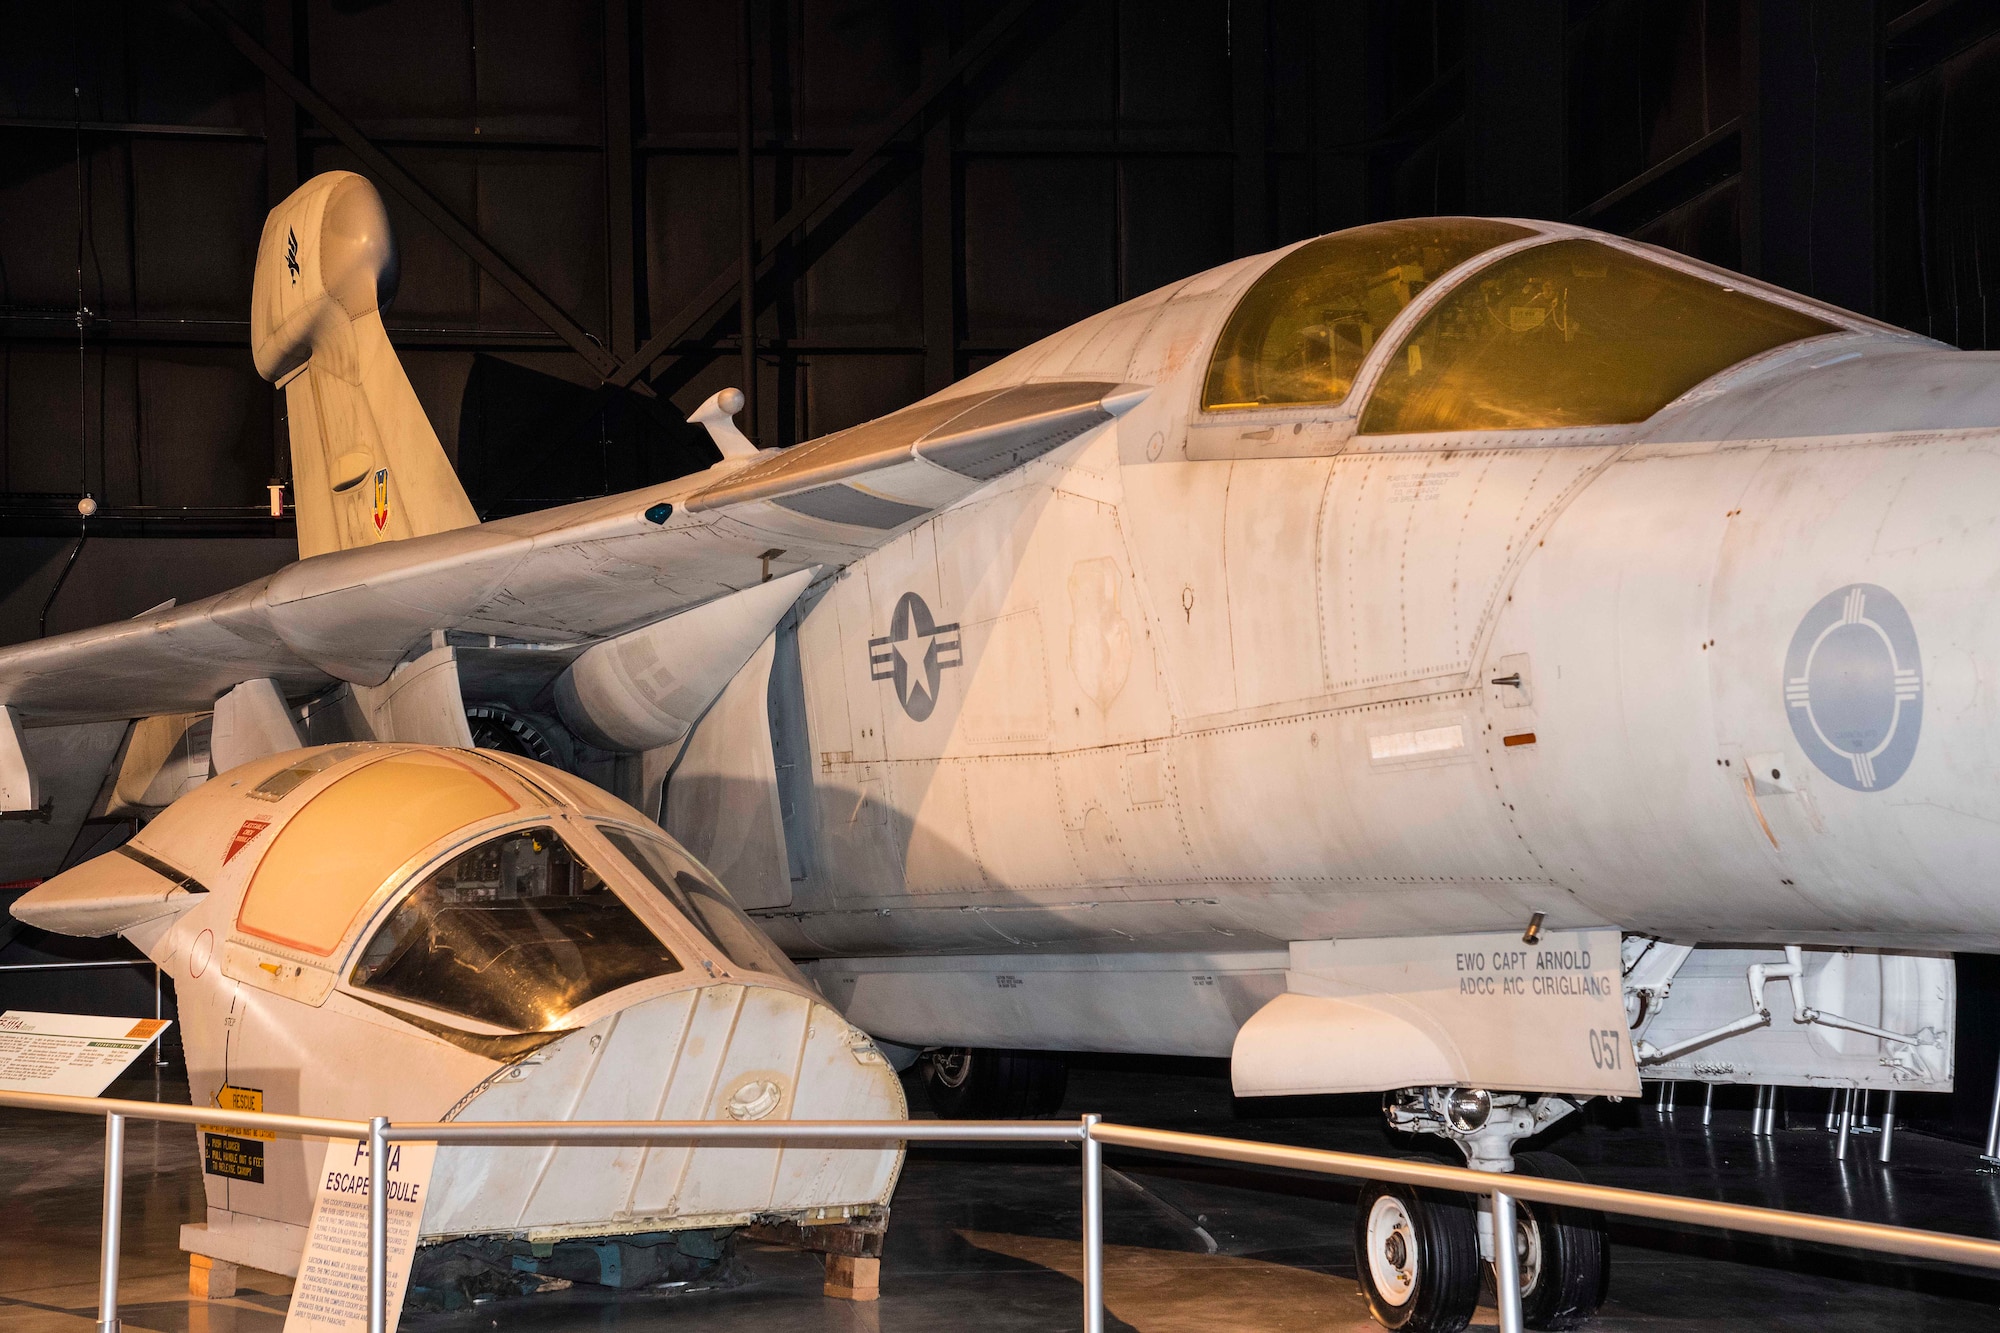 DAYTON, Ohio - The F-111A Escape Module on display in the Cold War Gallery at the National Museum of the U.S. Air Force. (U.S. Air Force photo by Ken LaRock)